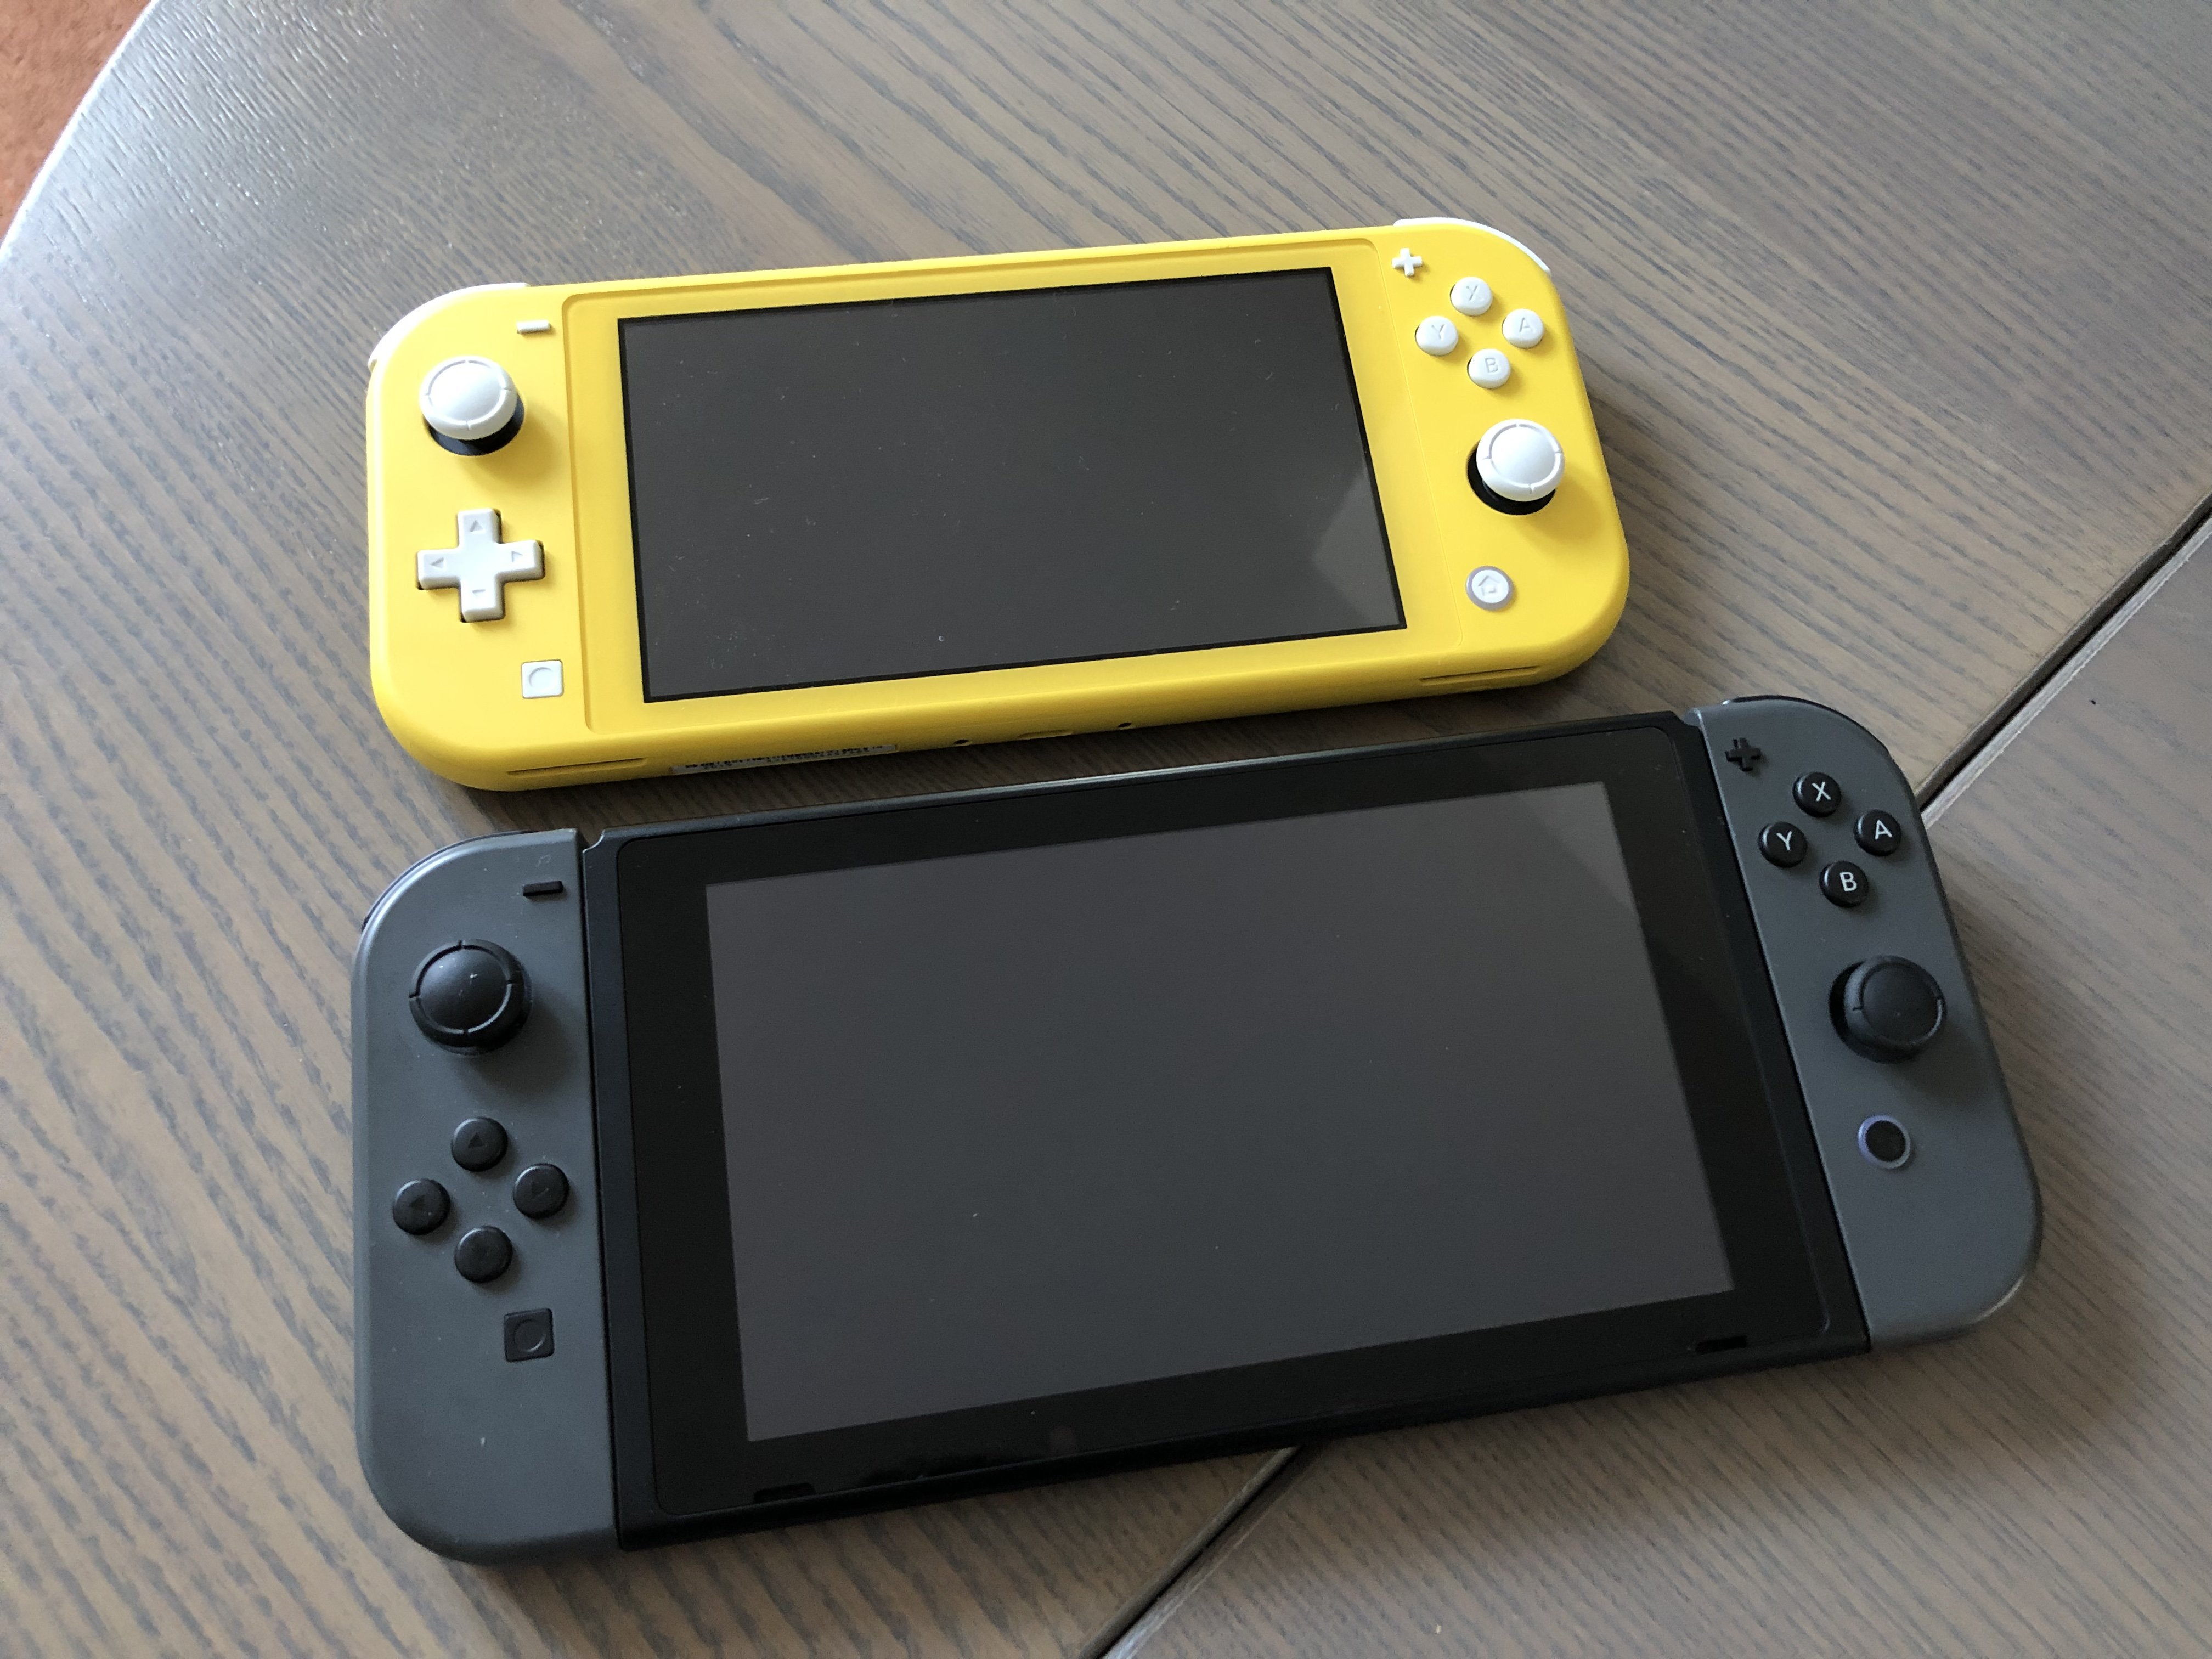 switch lite as second switch